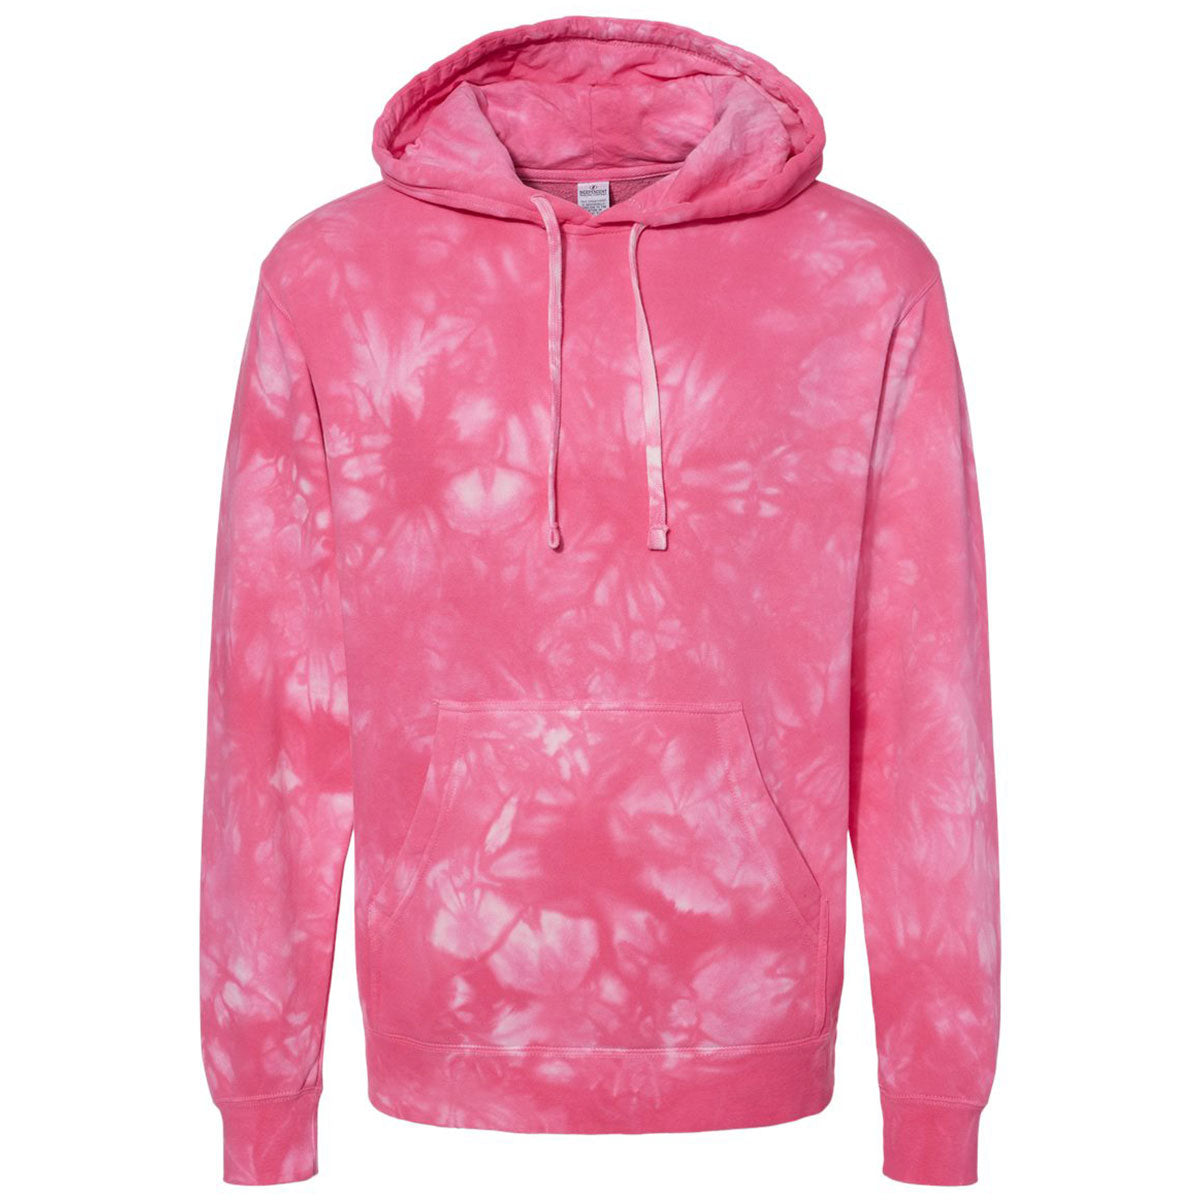 Personalized Tie Dye Hooded Sweatshirt With Front Pocket -  Israel